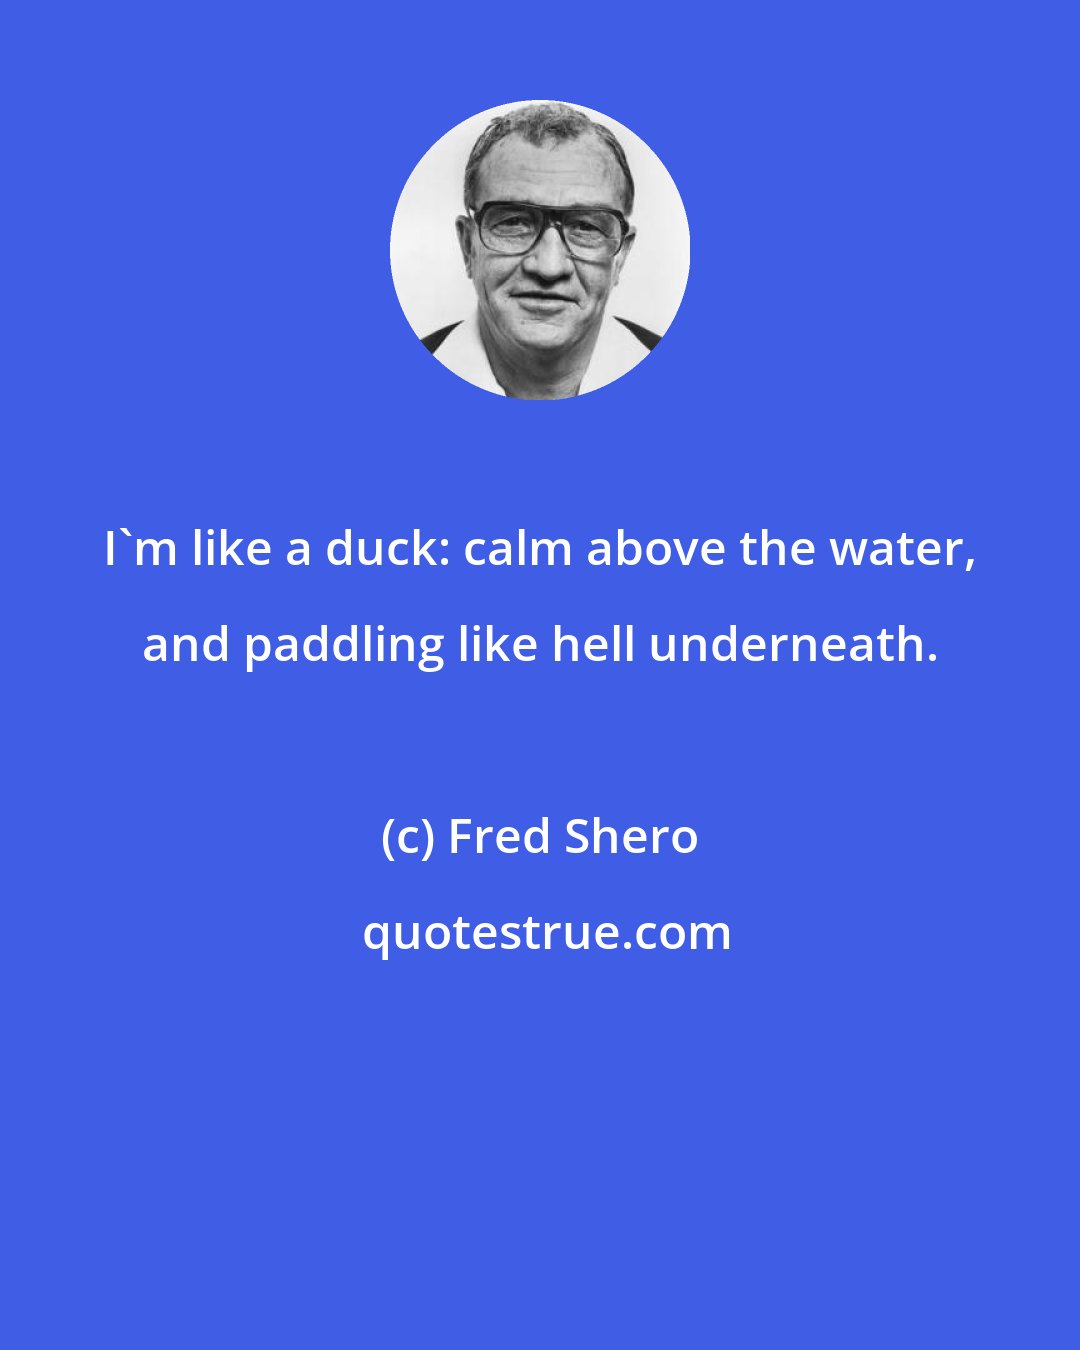 Fred Shero: I'm like a duck: calm above the water, and paddling like hell underneath.